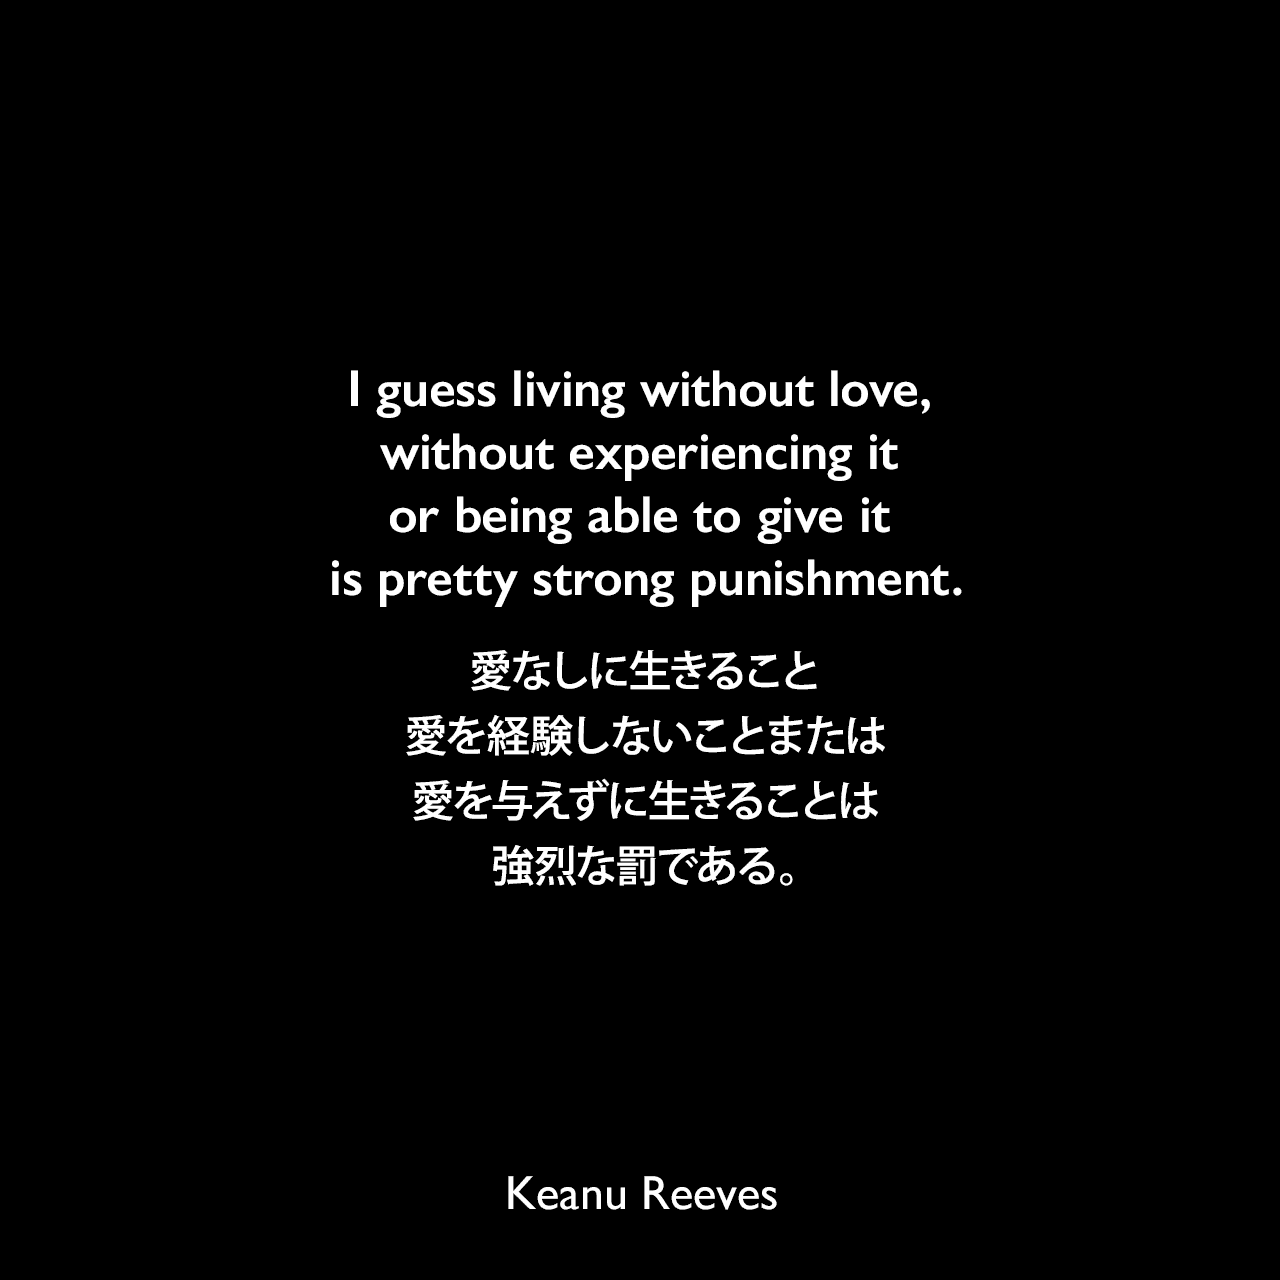 I guess living without love, without experiencing it or being able to give it is pretty strong punishment.愛なしに生きること、愛を経験しないことまたは愛を与えずに生きることは強烈な罰である。